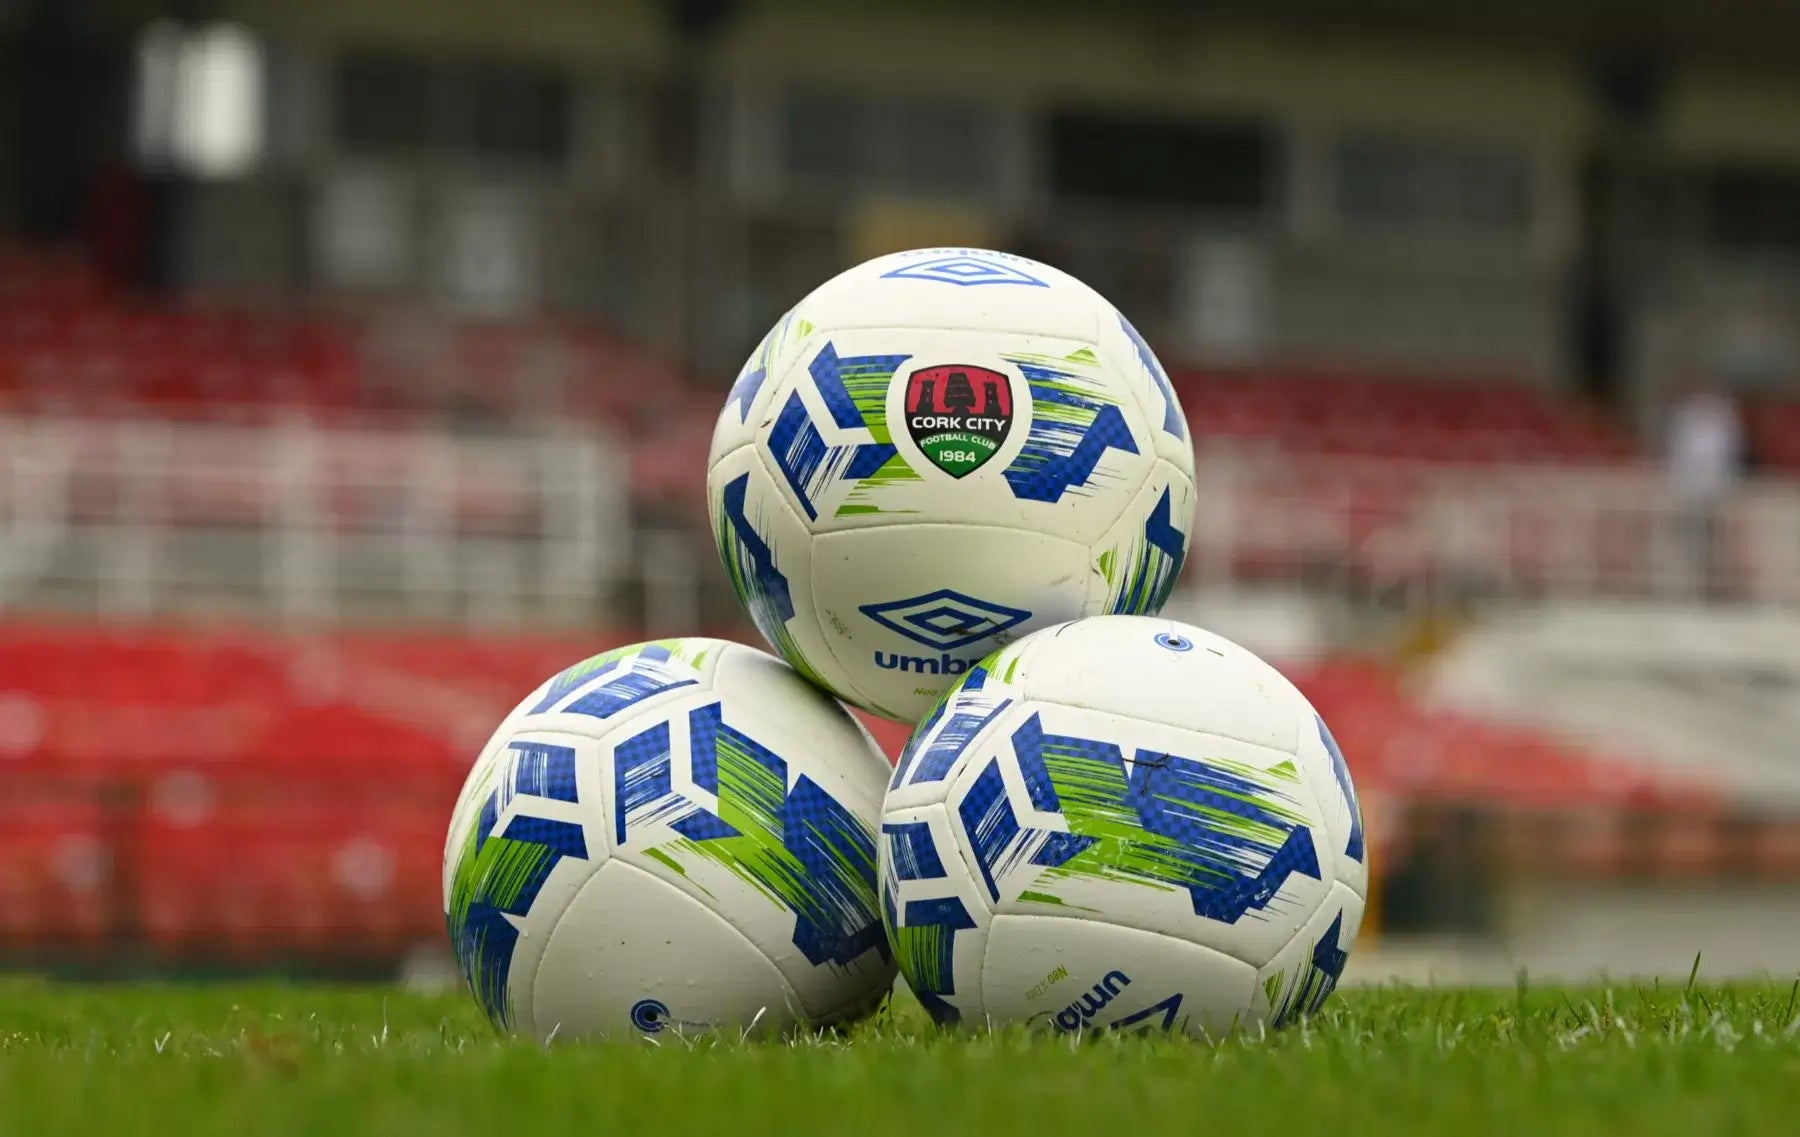 2021 SSE Airtricity League Fixtures Confirmed!